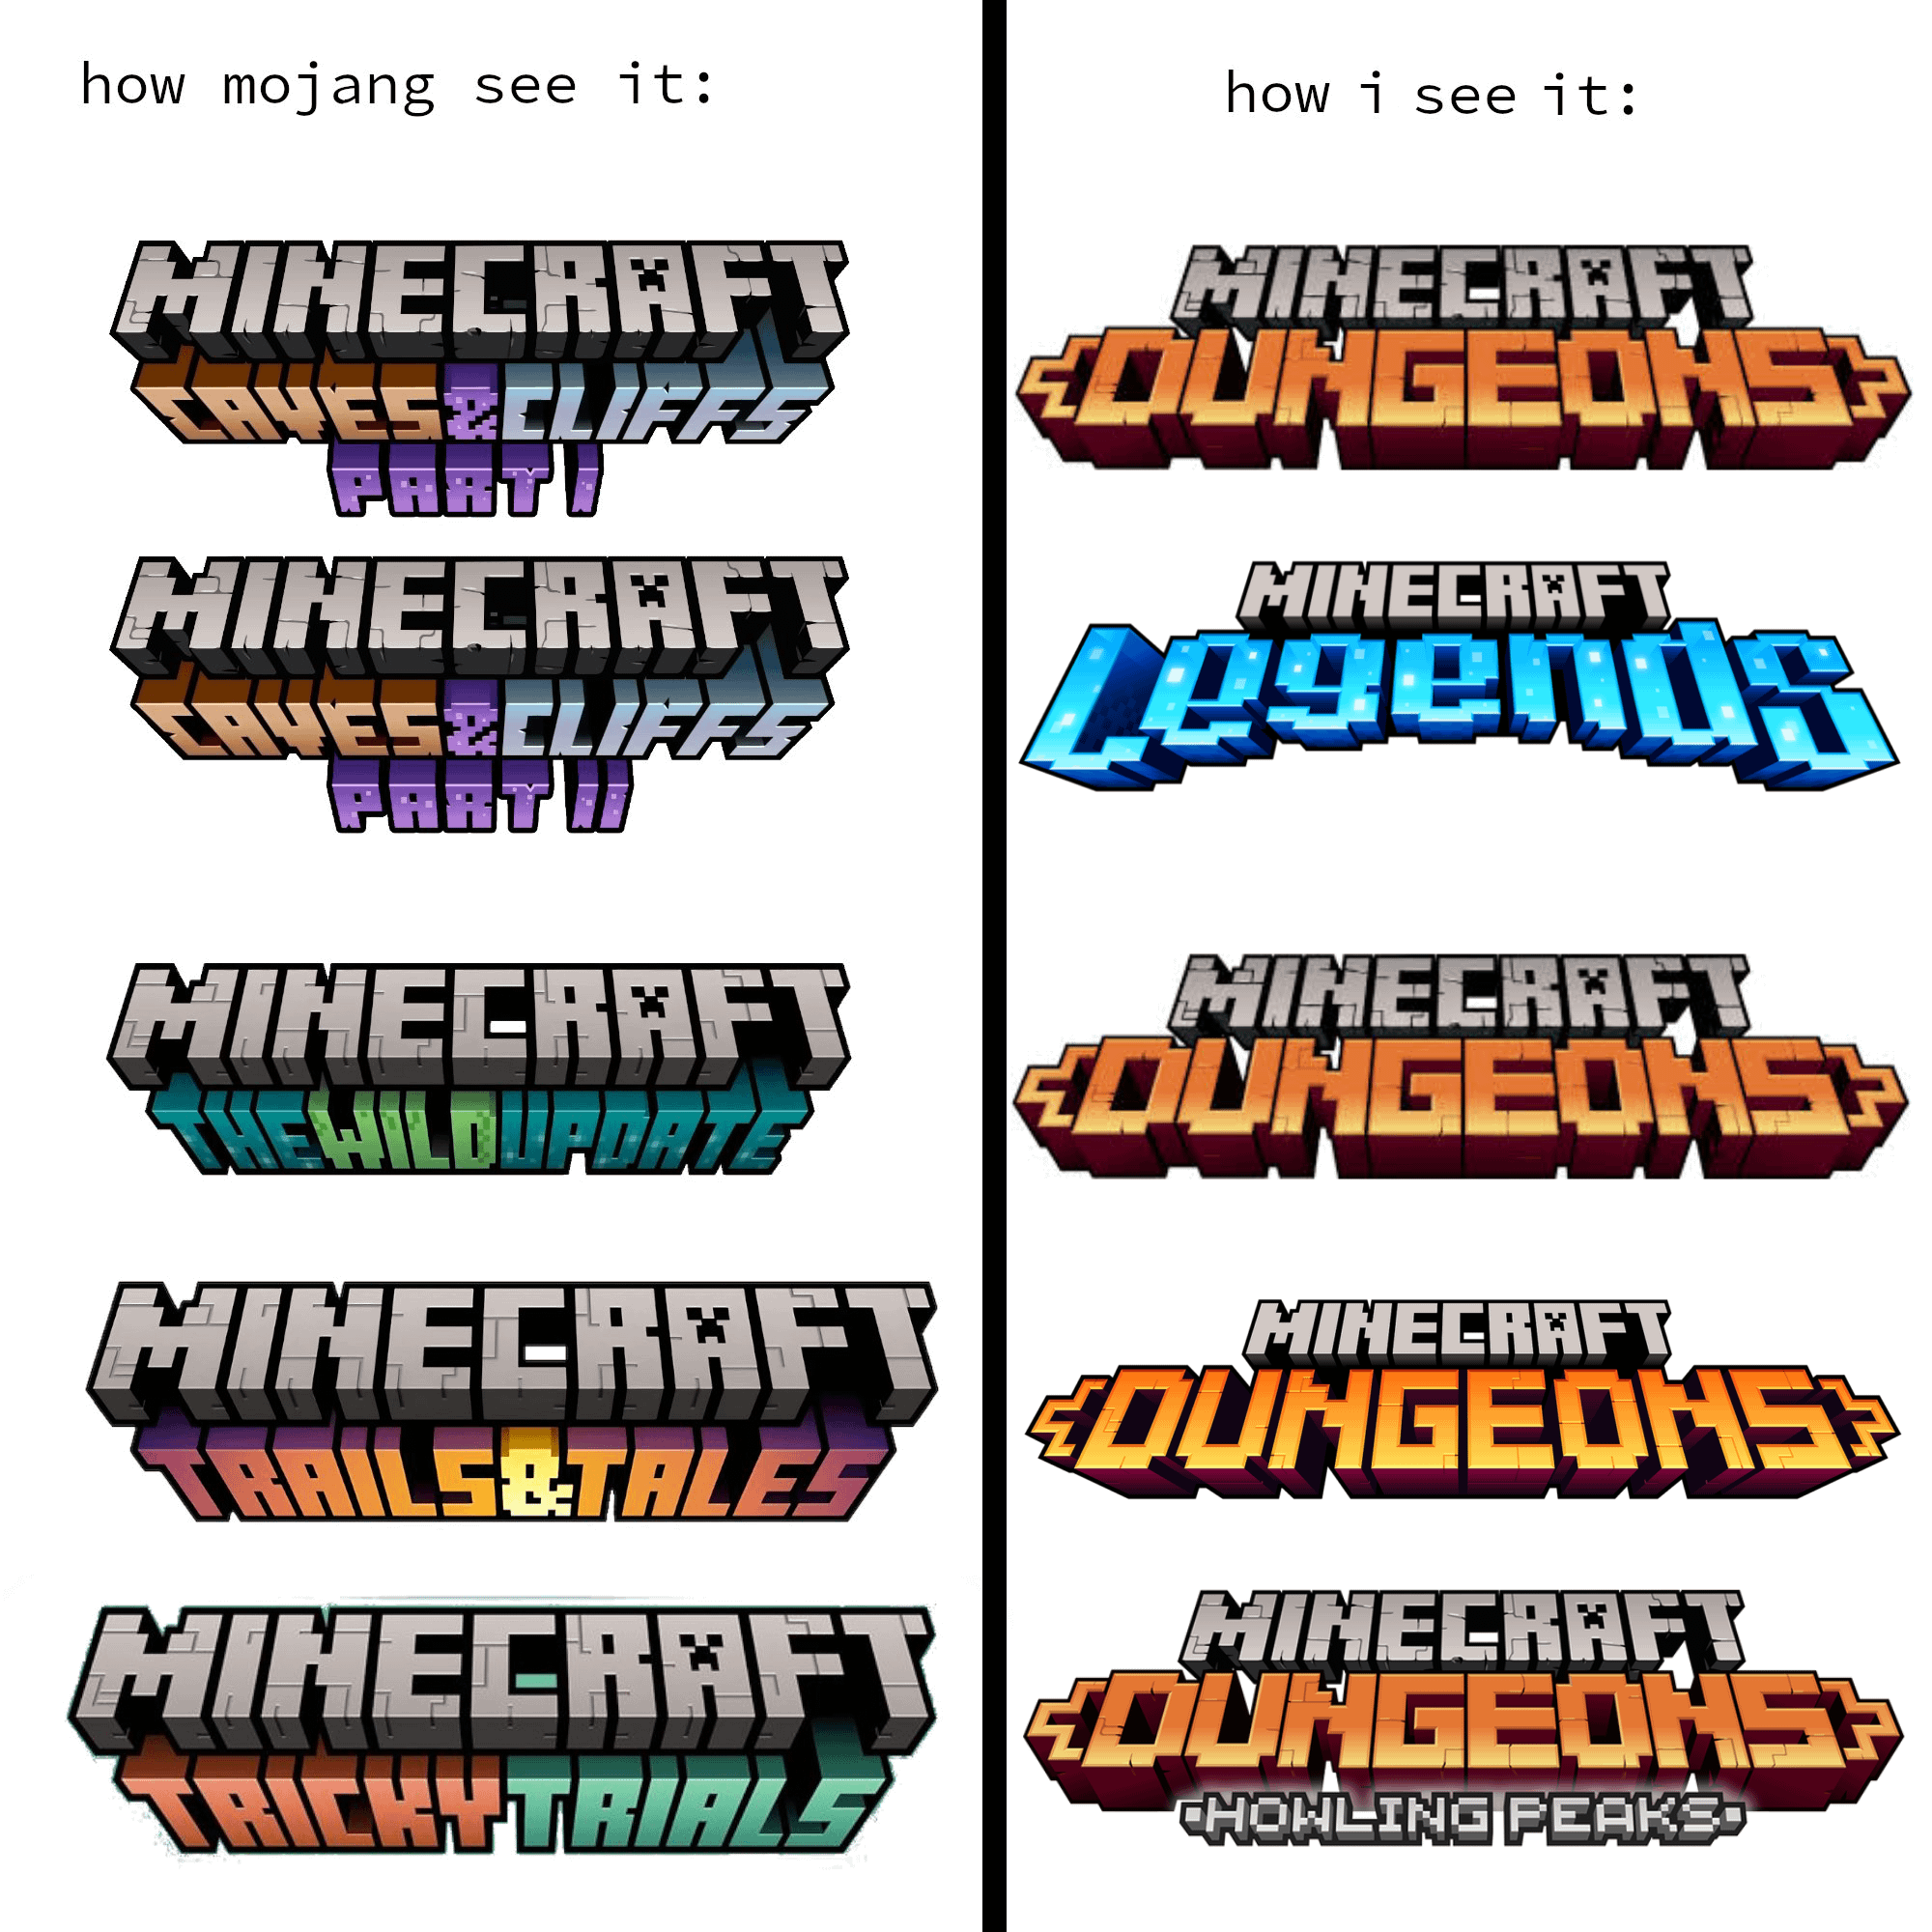 Minecraft Memes - I have a spicy hot take!